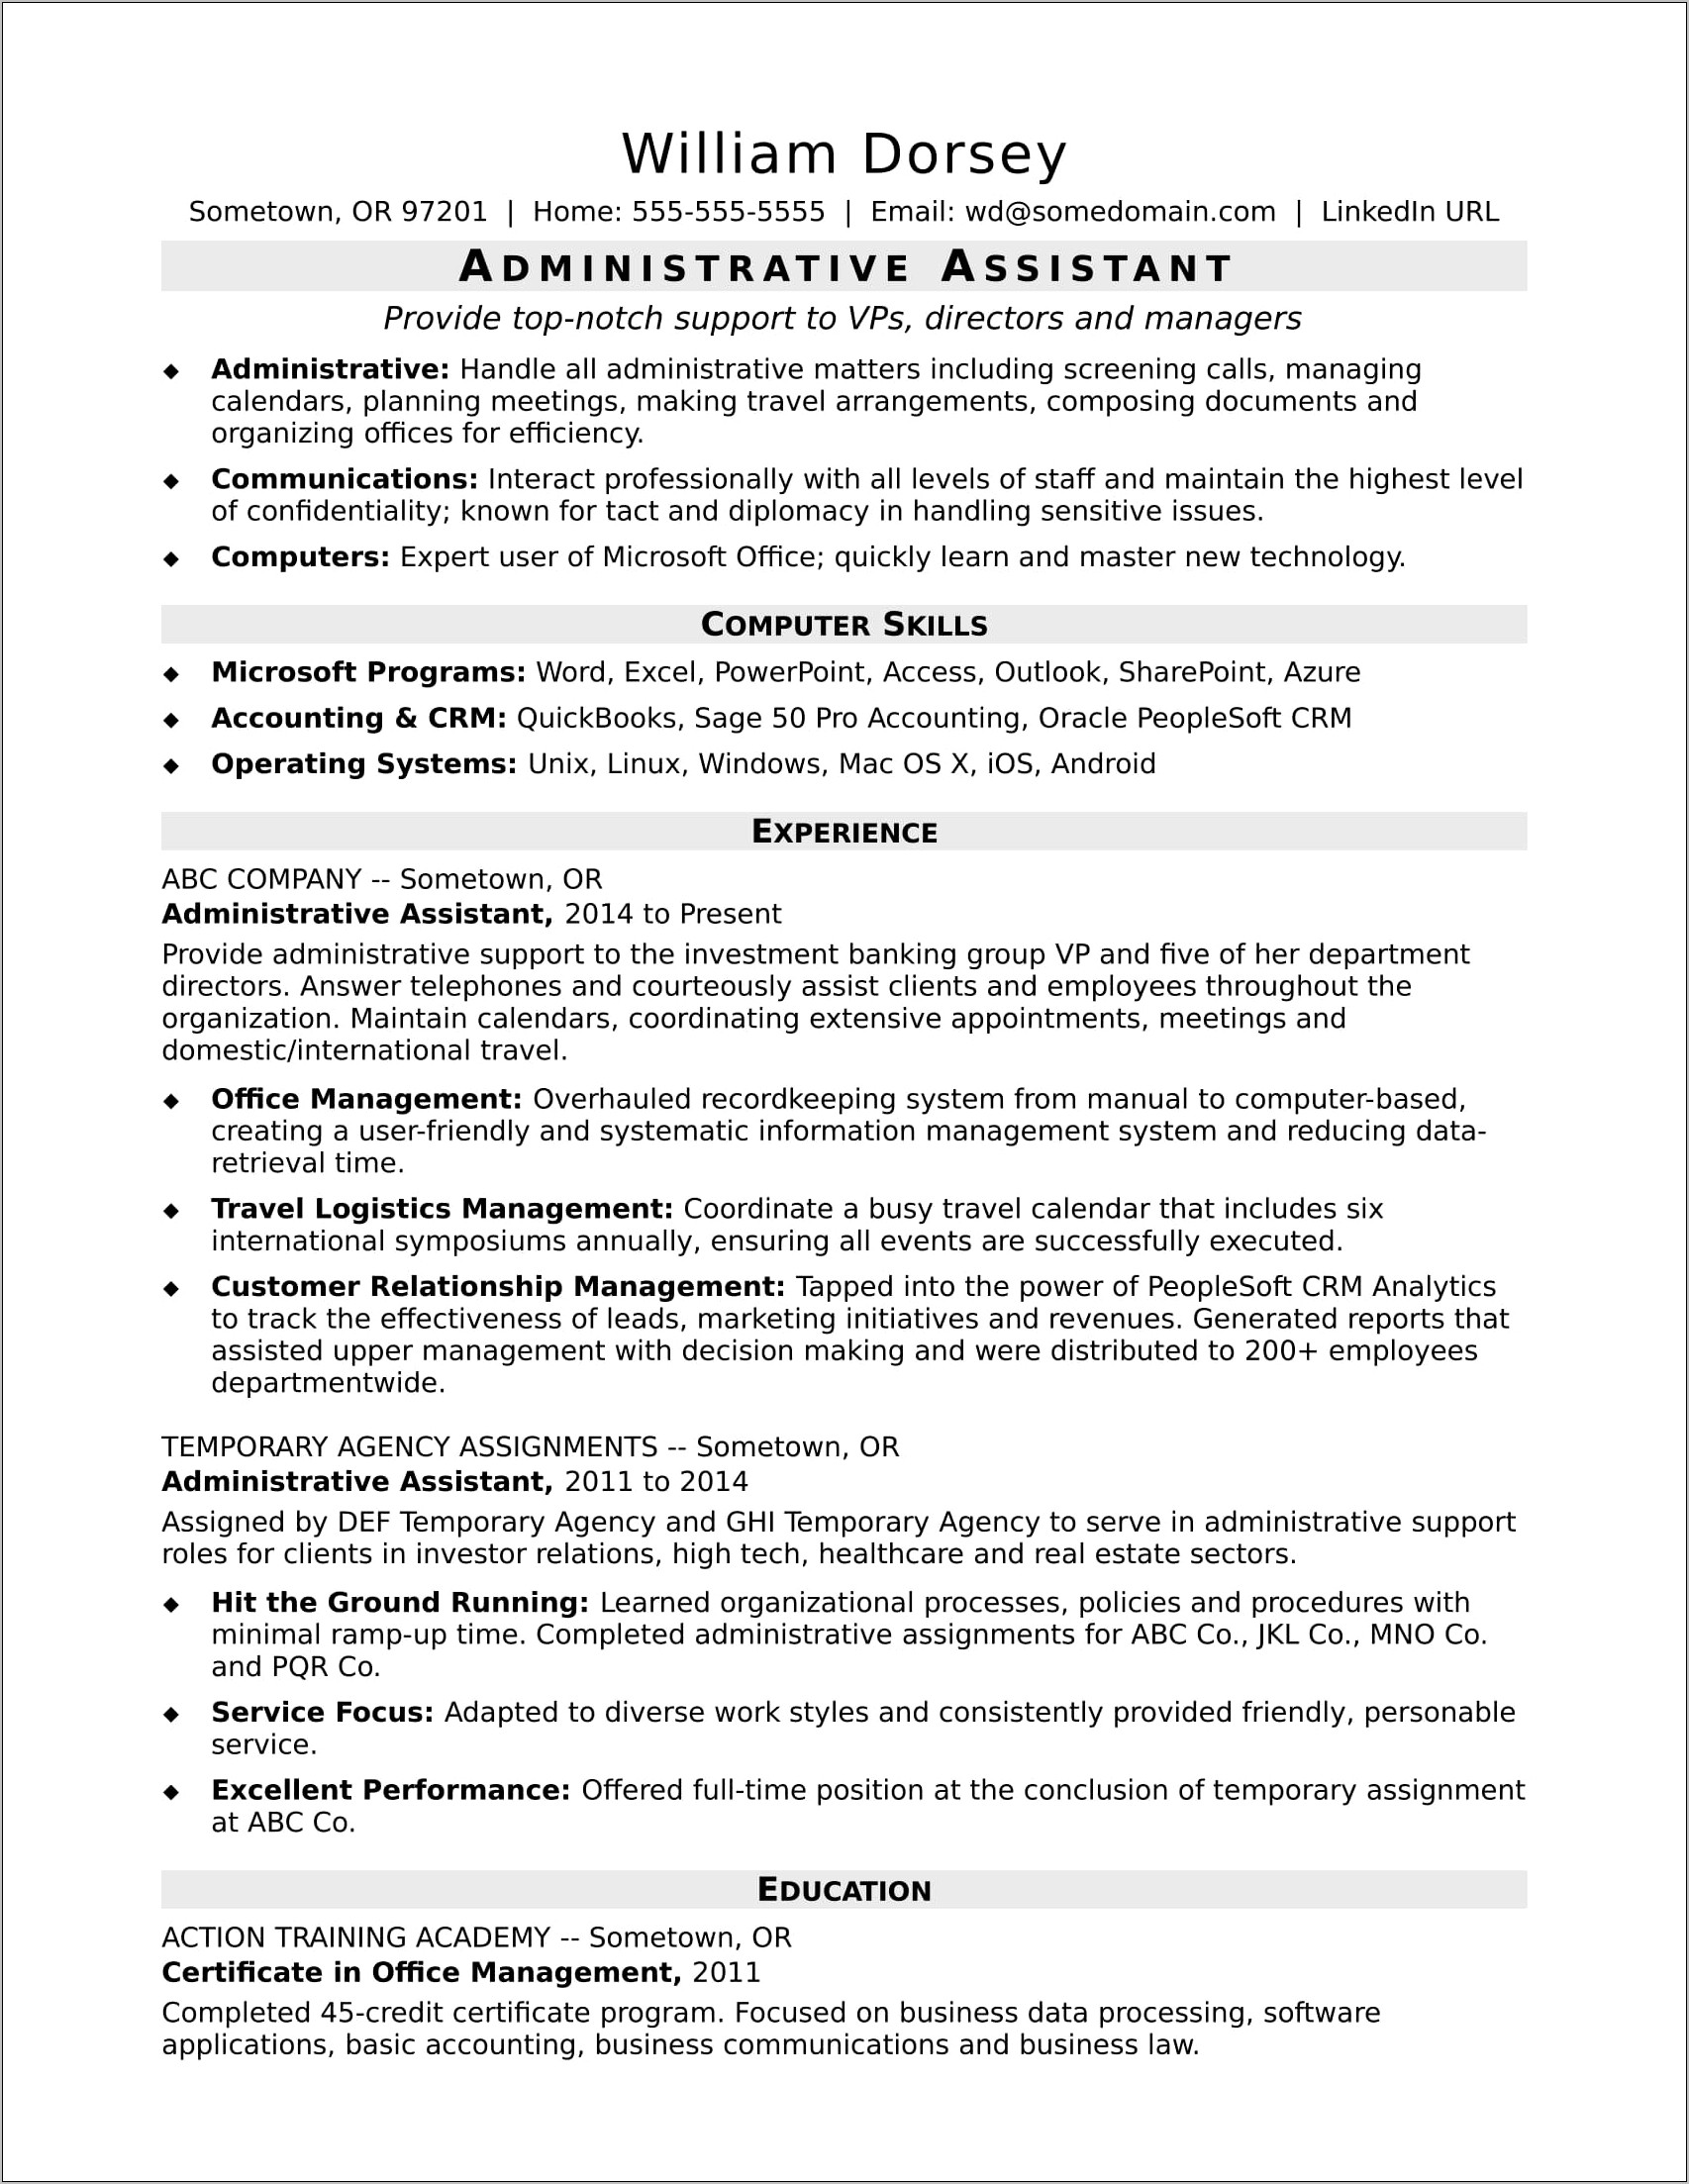 Administrative Assistant Resume With Objective